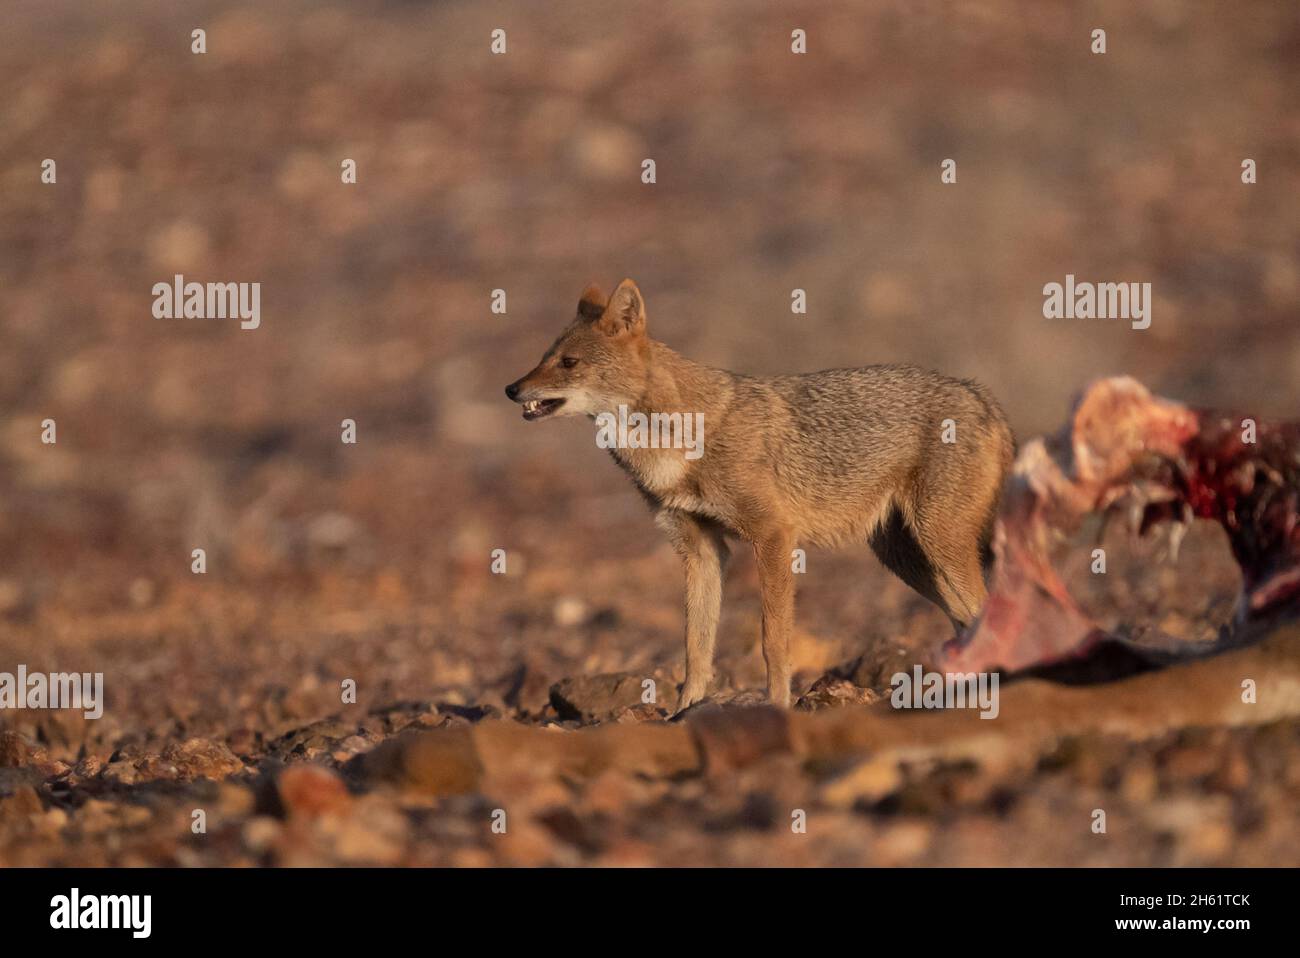 Golden jackal (Canis lupus arabs) Near the remains of an animal's carcass Stock Photo